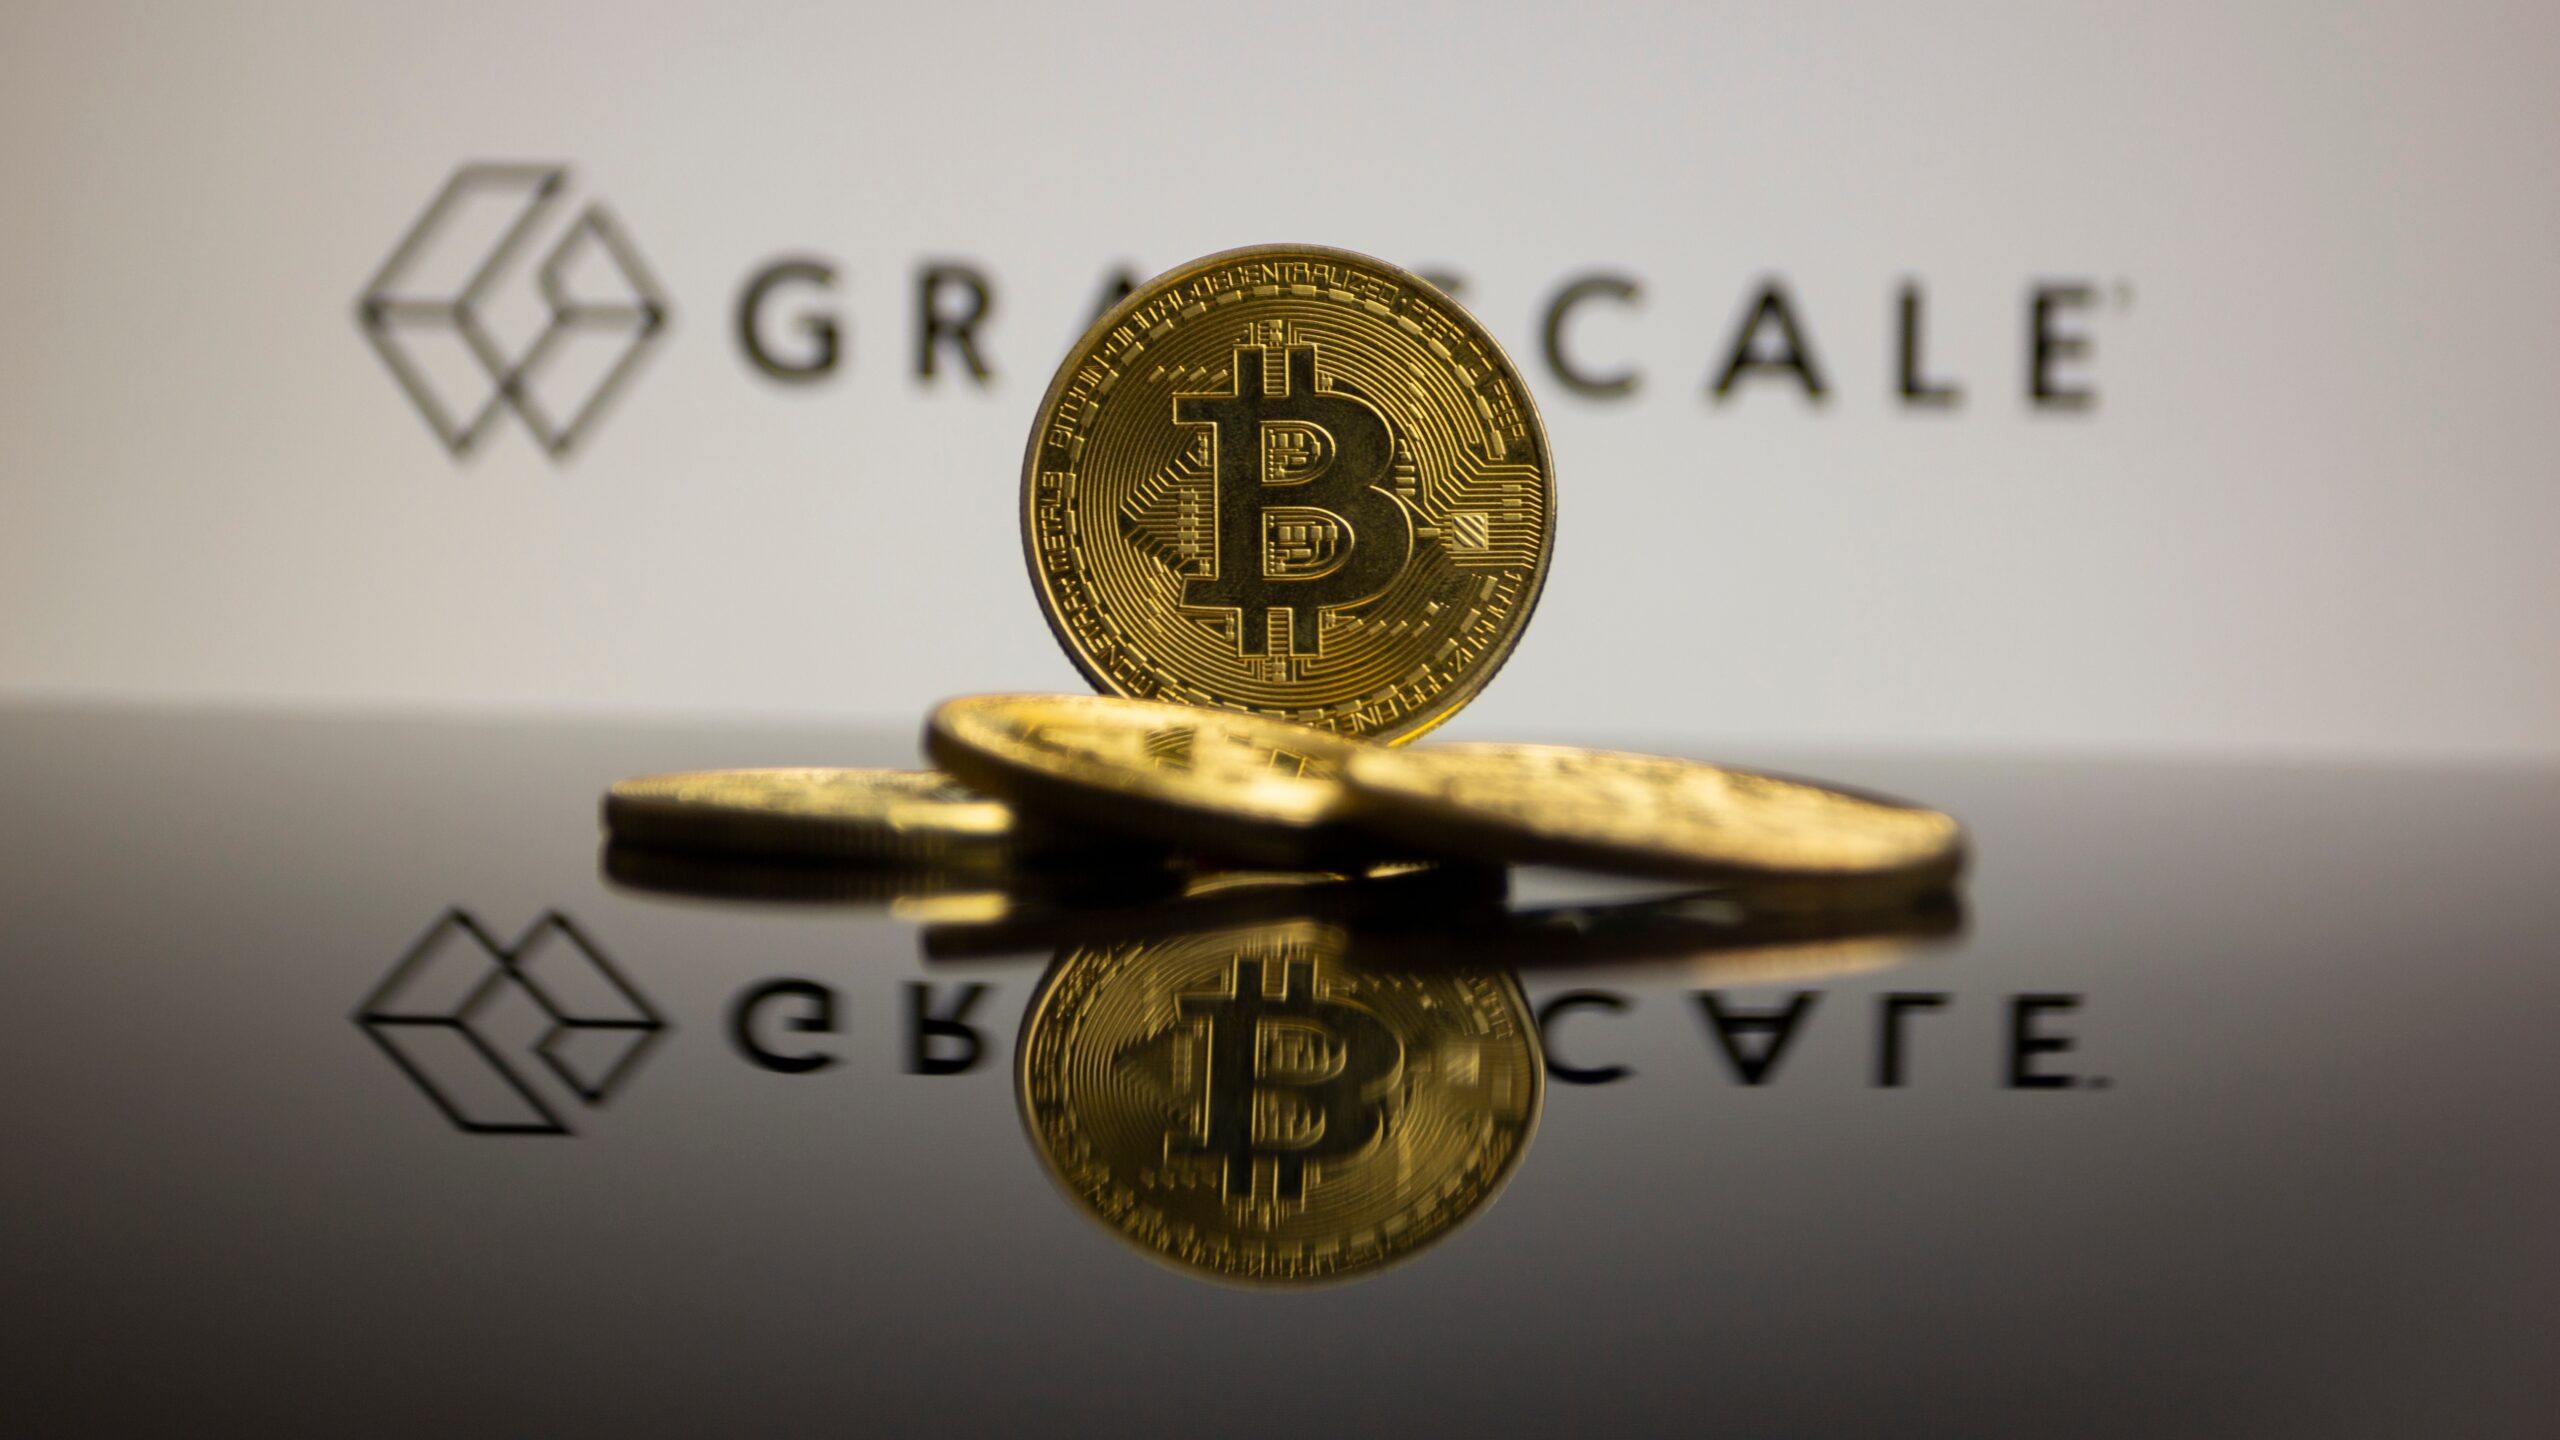 Grayscale Files to Spin Off Lower-Fee ‘Bitcoin Mini Trust’ From GBTC - Unchained